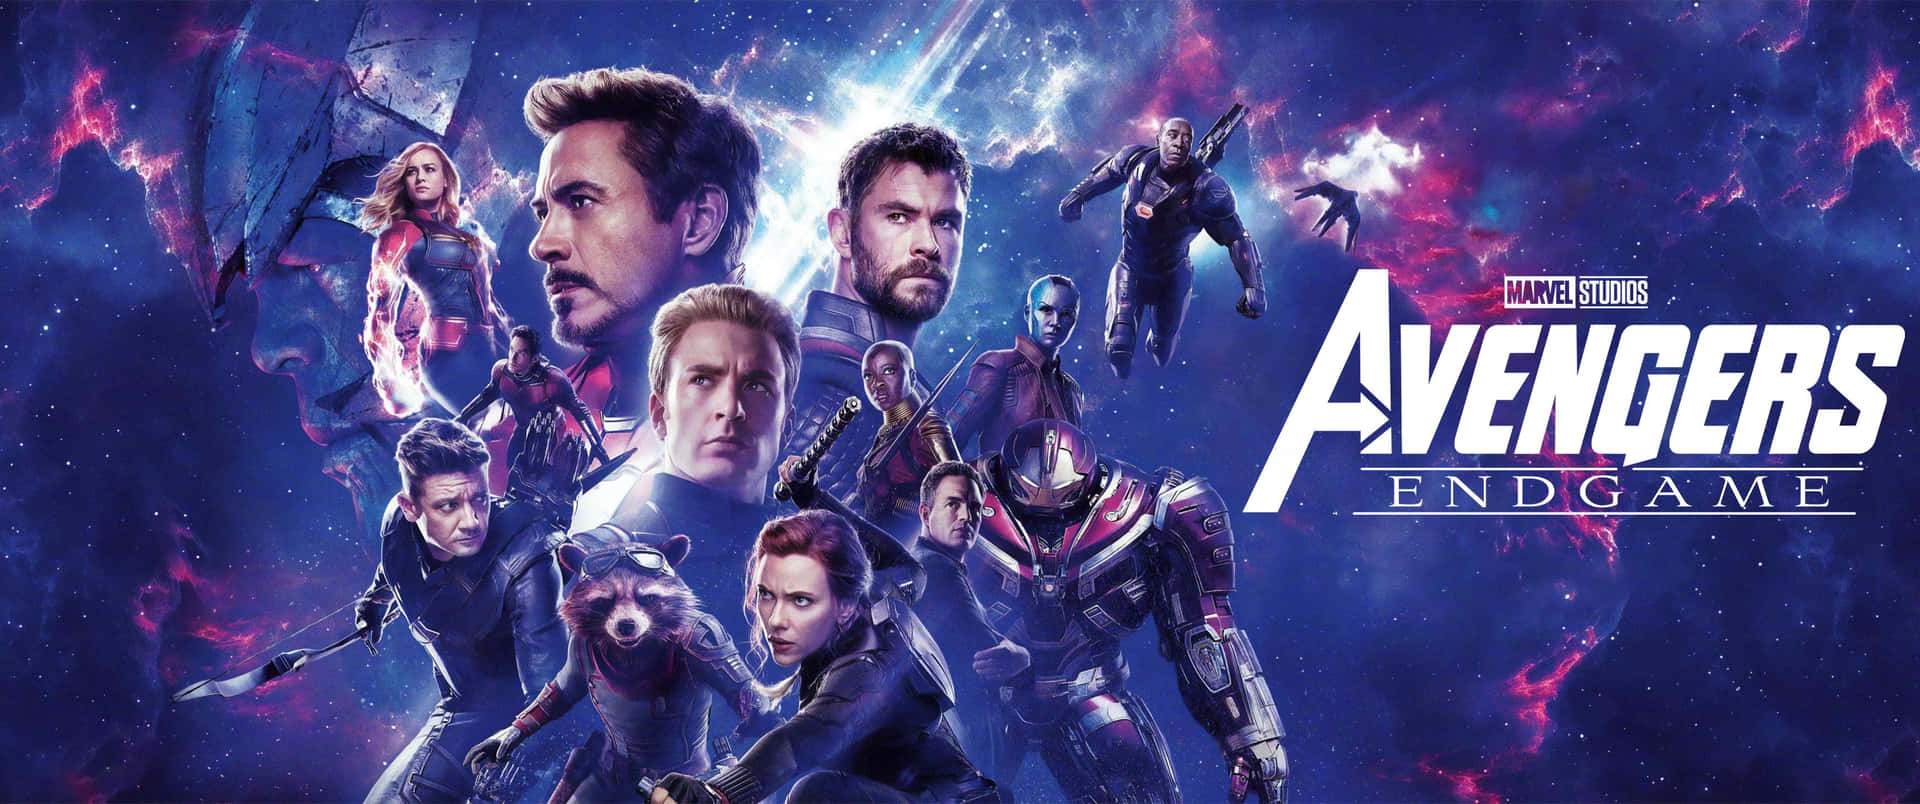 Marvel3440 X 1440 Avengers Endgame Translates To Italian As Marvel 3440 X 1440 Avengers Endgame. It Remains The Same In Italian As It Is A Proper Noun And A Specific Title. Sfondo